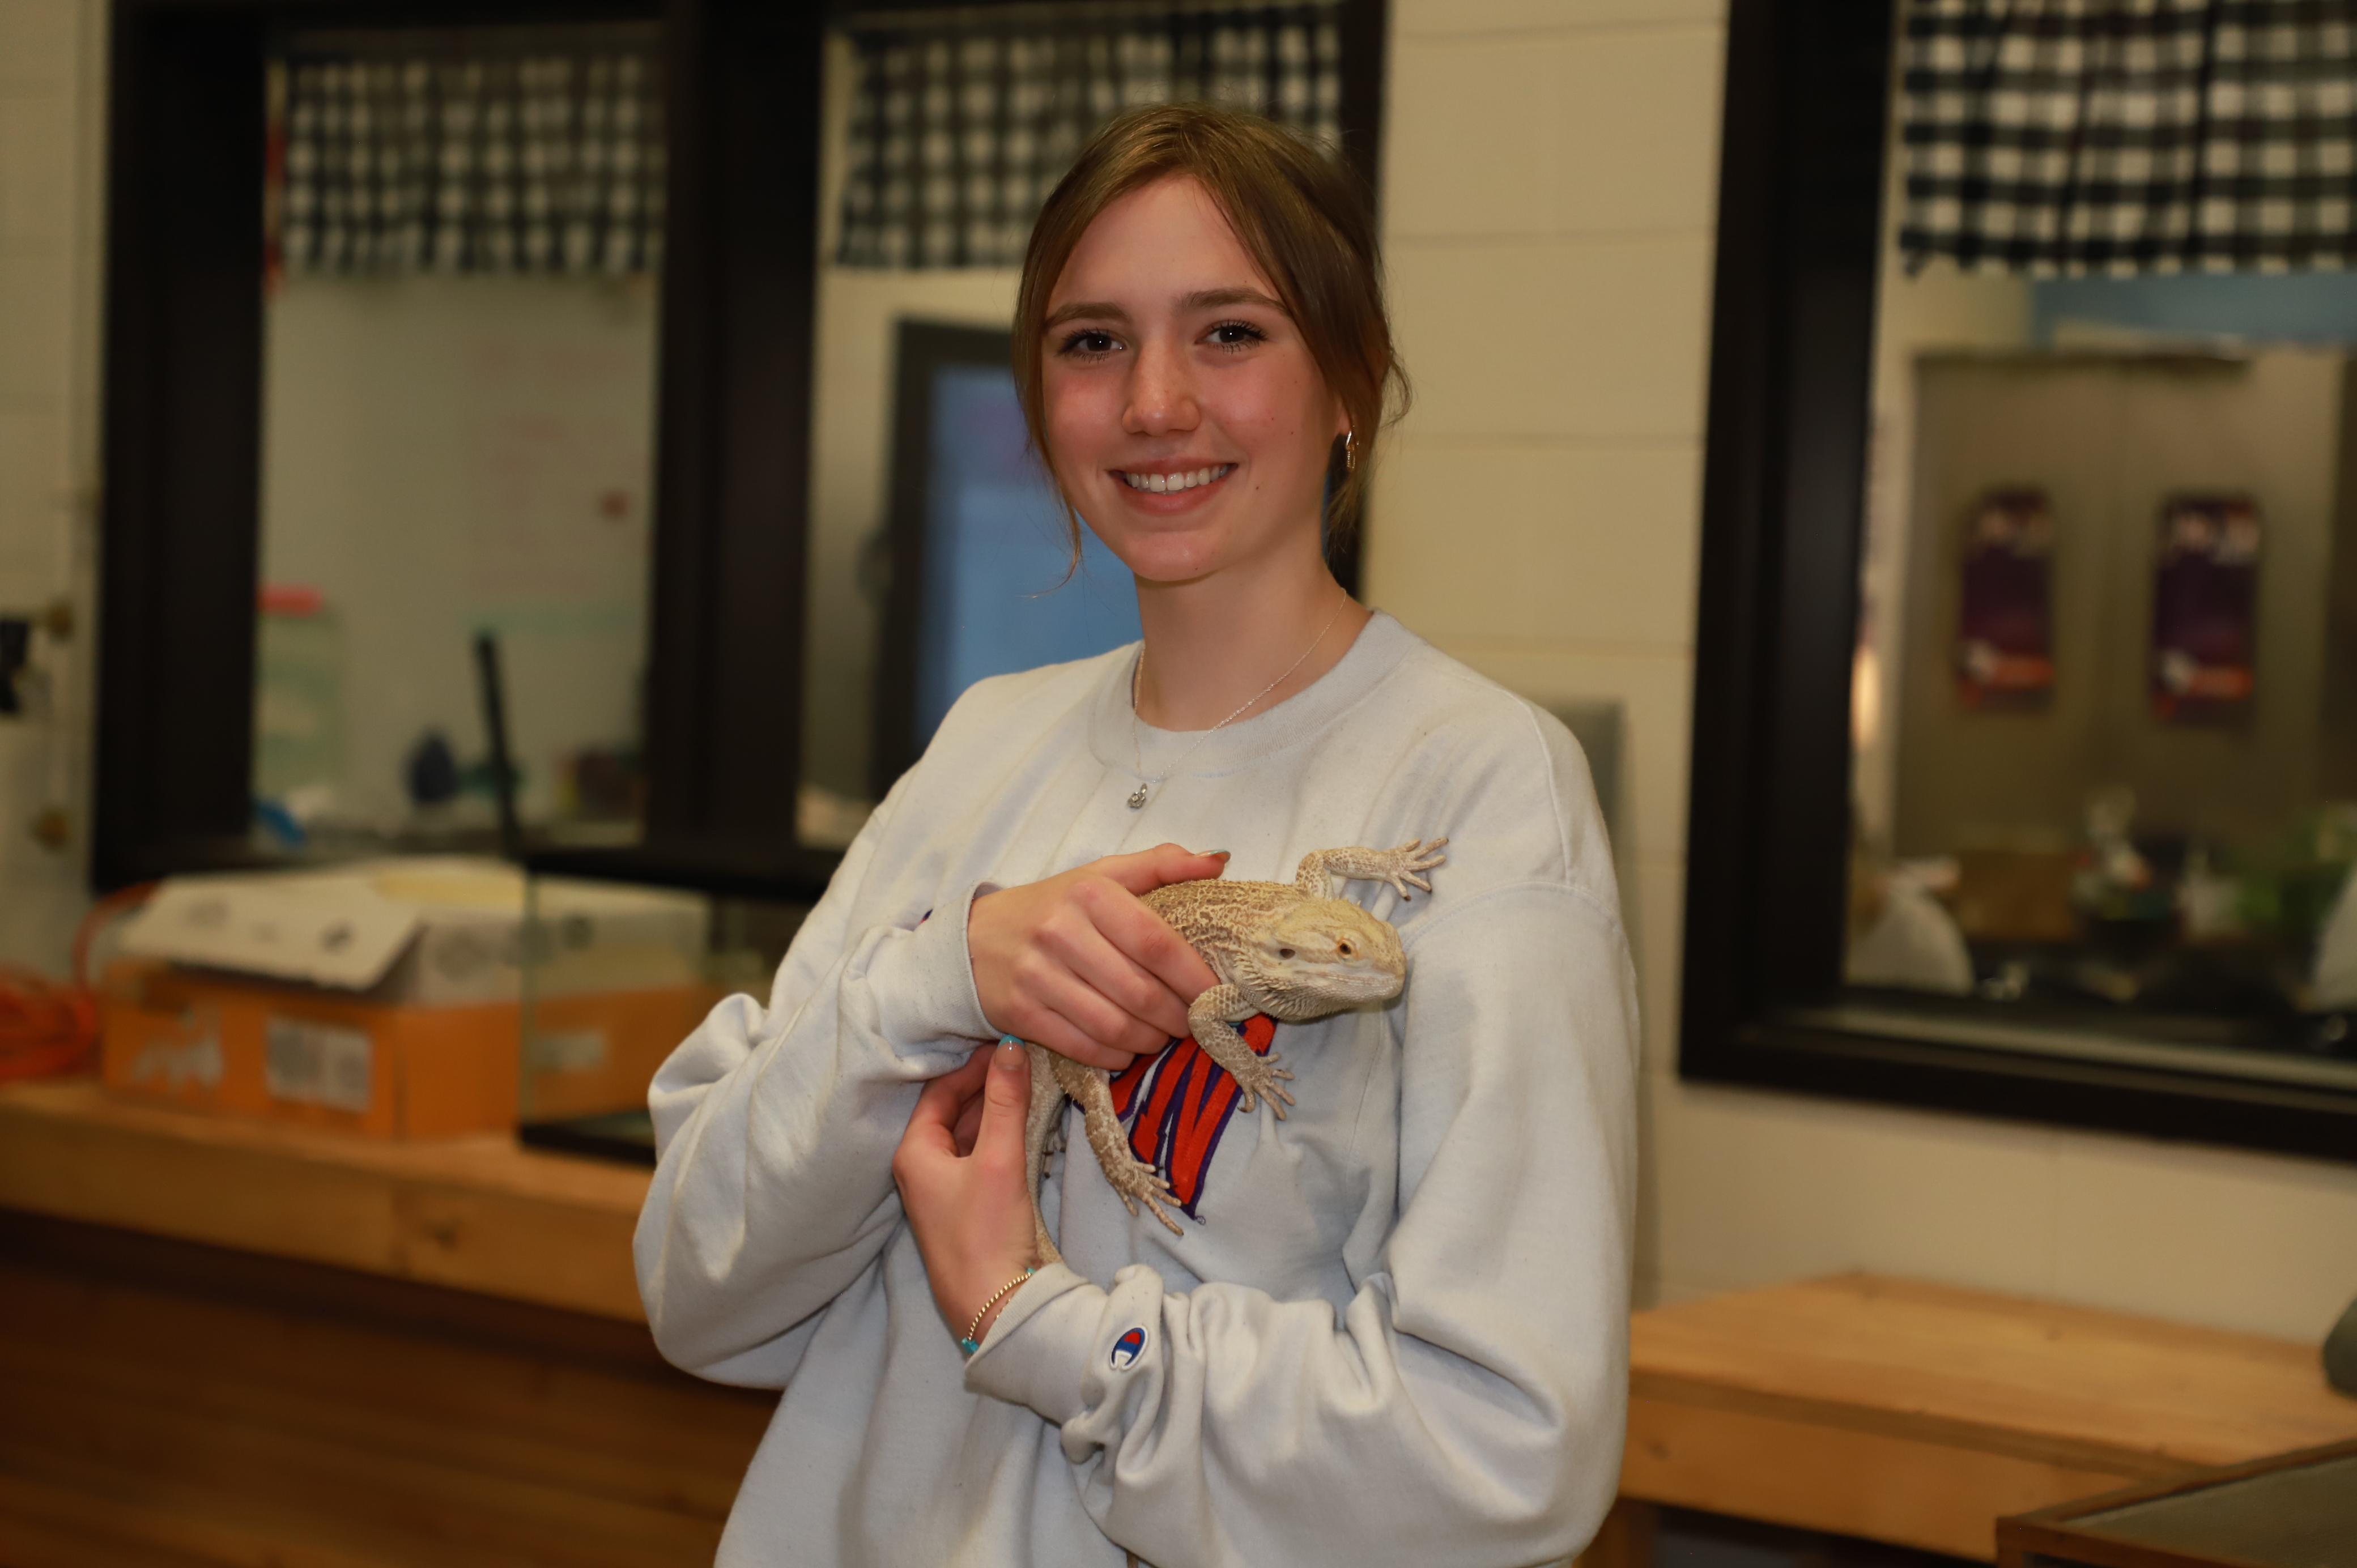 Student with lizard